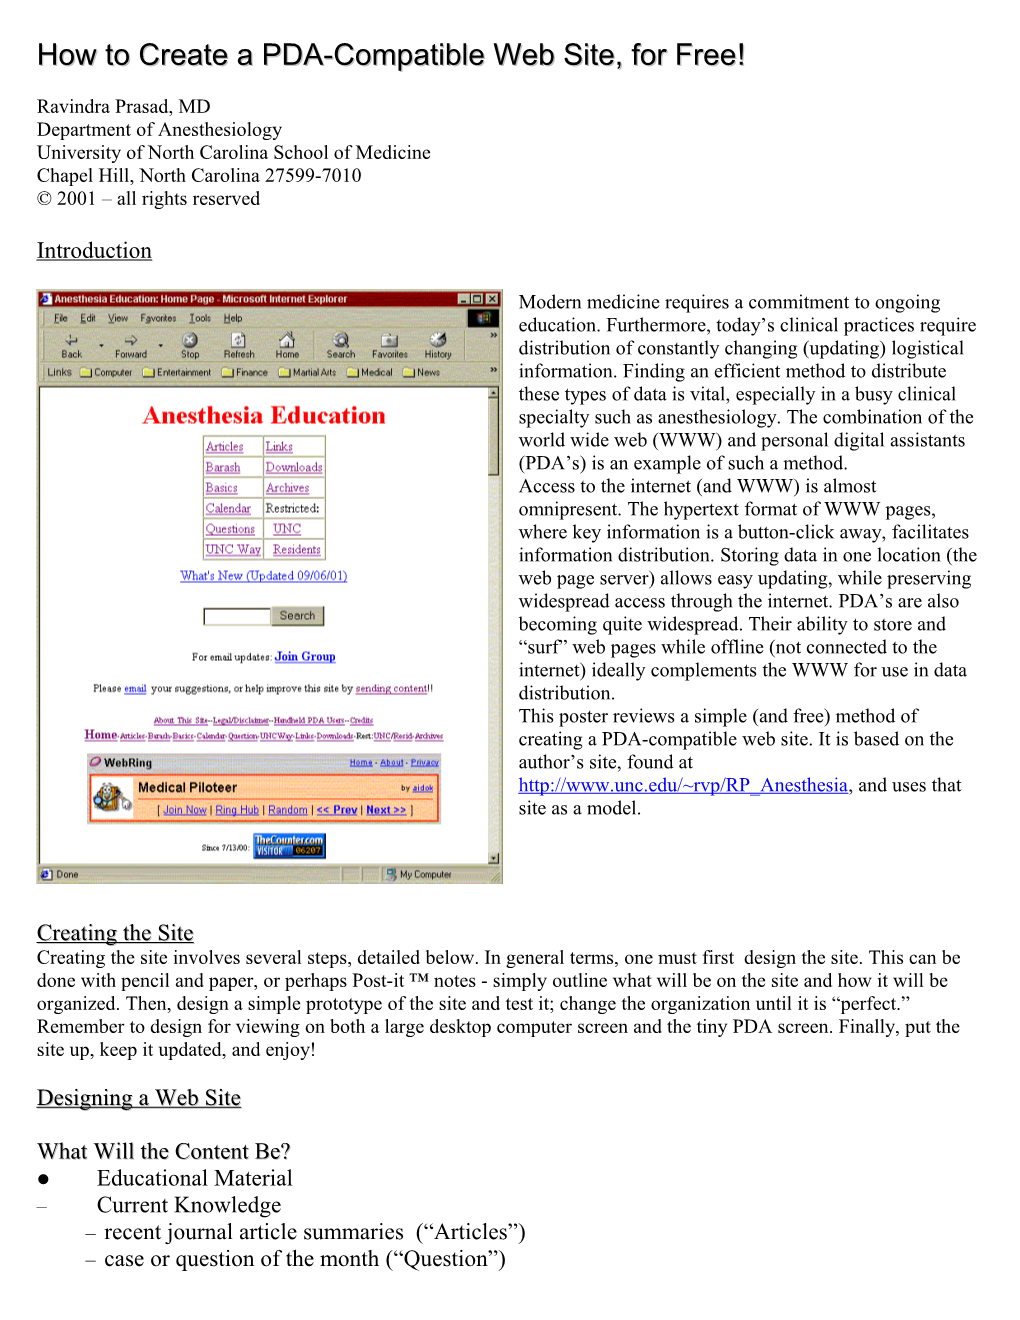 How to Create a PDA-Compatible Web Site (For Internet Dummies)